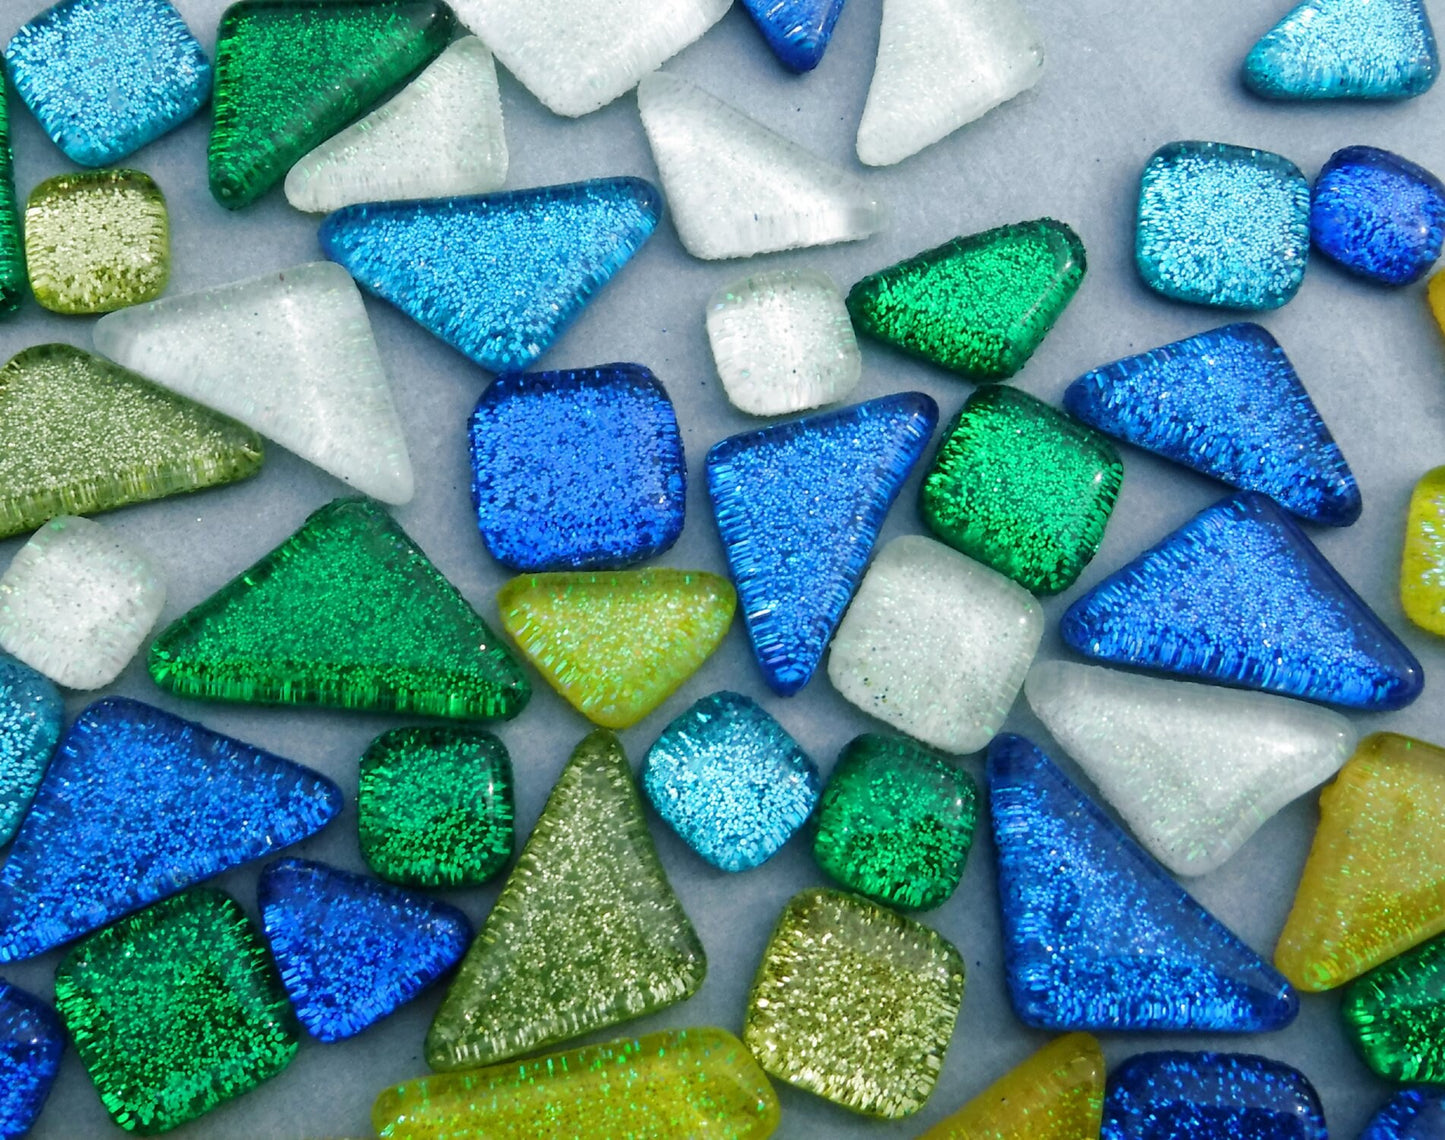 Rain Flower Glitter Puzzle Tiles - Assorted Shapes and Colors - 100 grams Mosaic Tiles Glass in Blues Greens Yellows and White